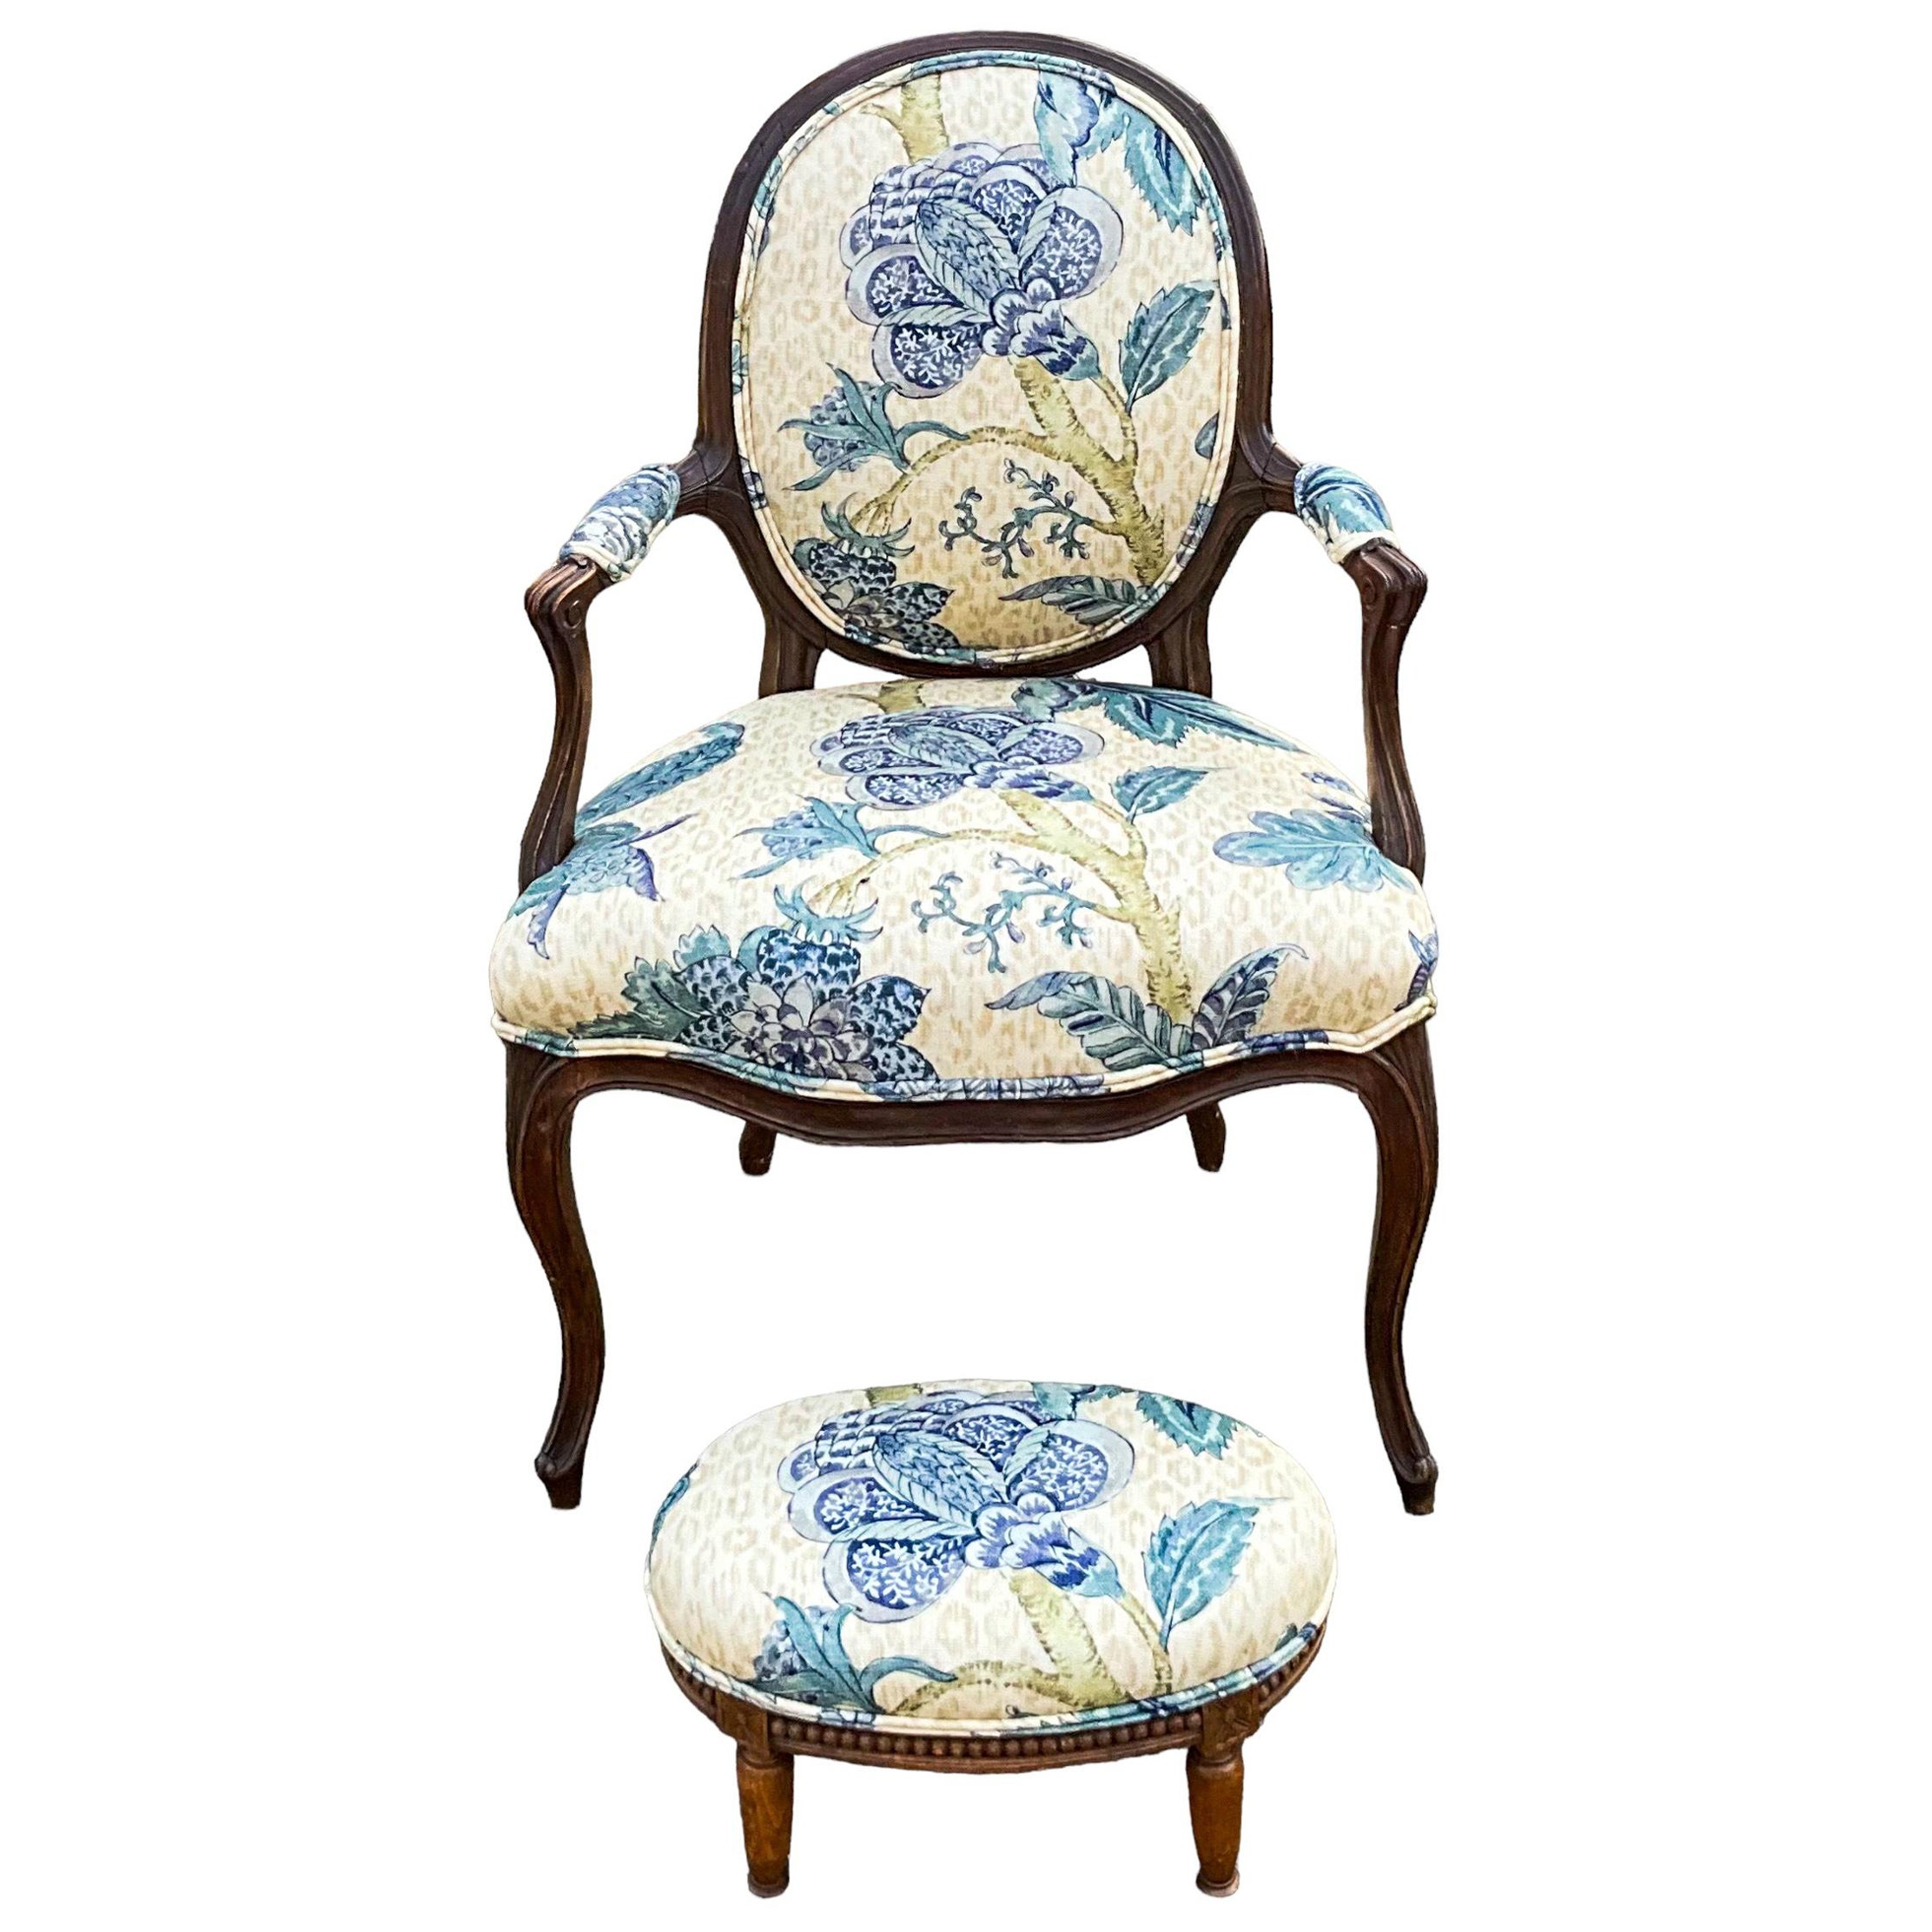 Antique French Fruitwood Berger Chair & Ottoman In Blue Floral & Leopard - S/2 For Sale